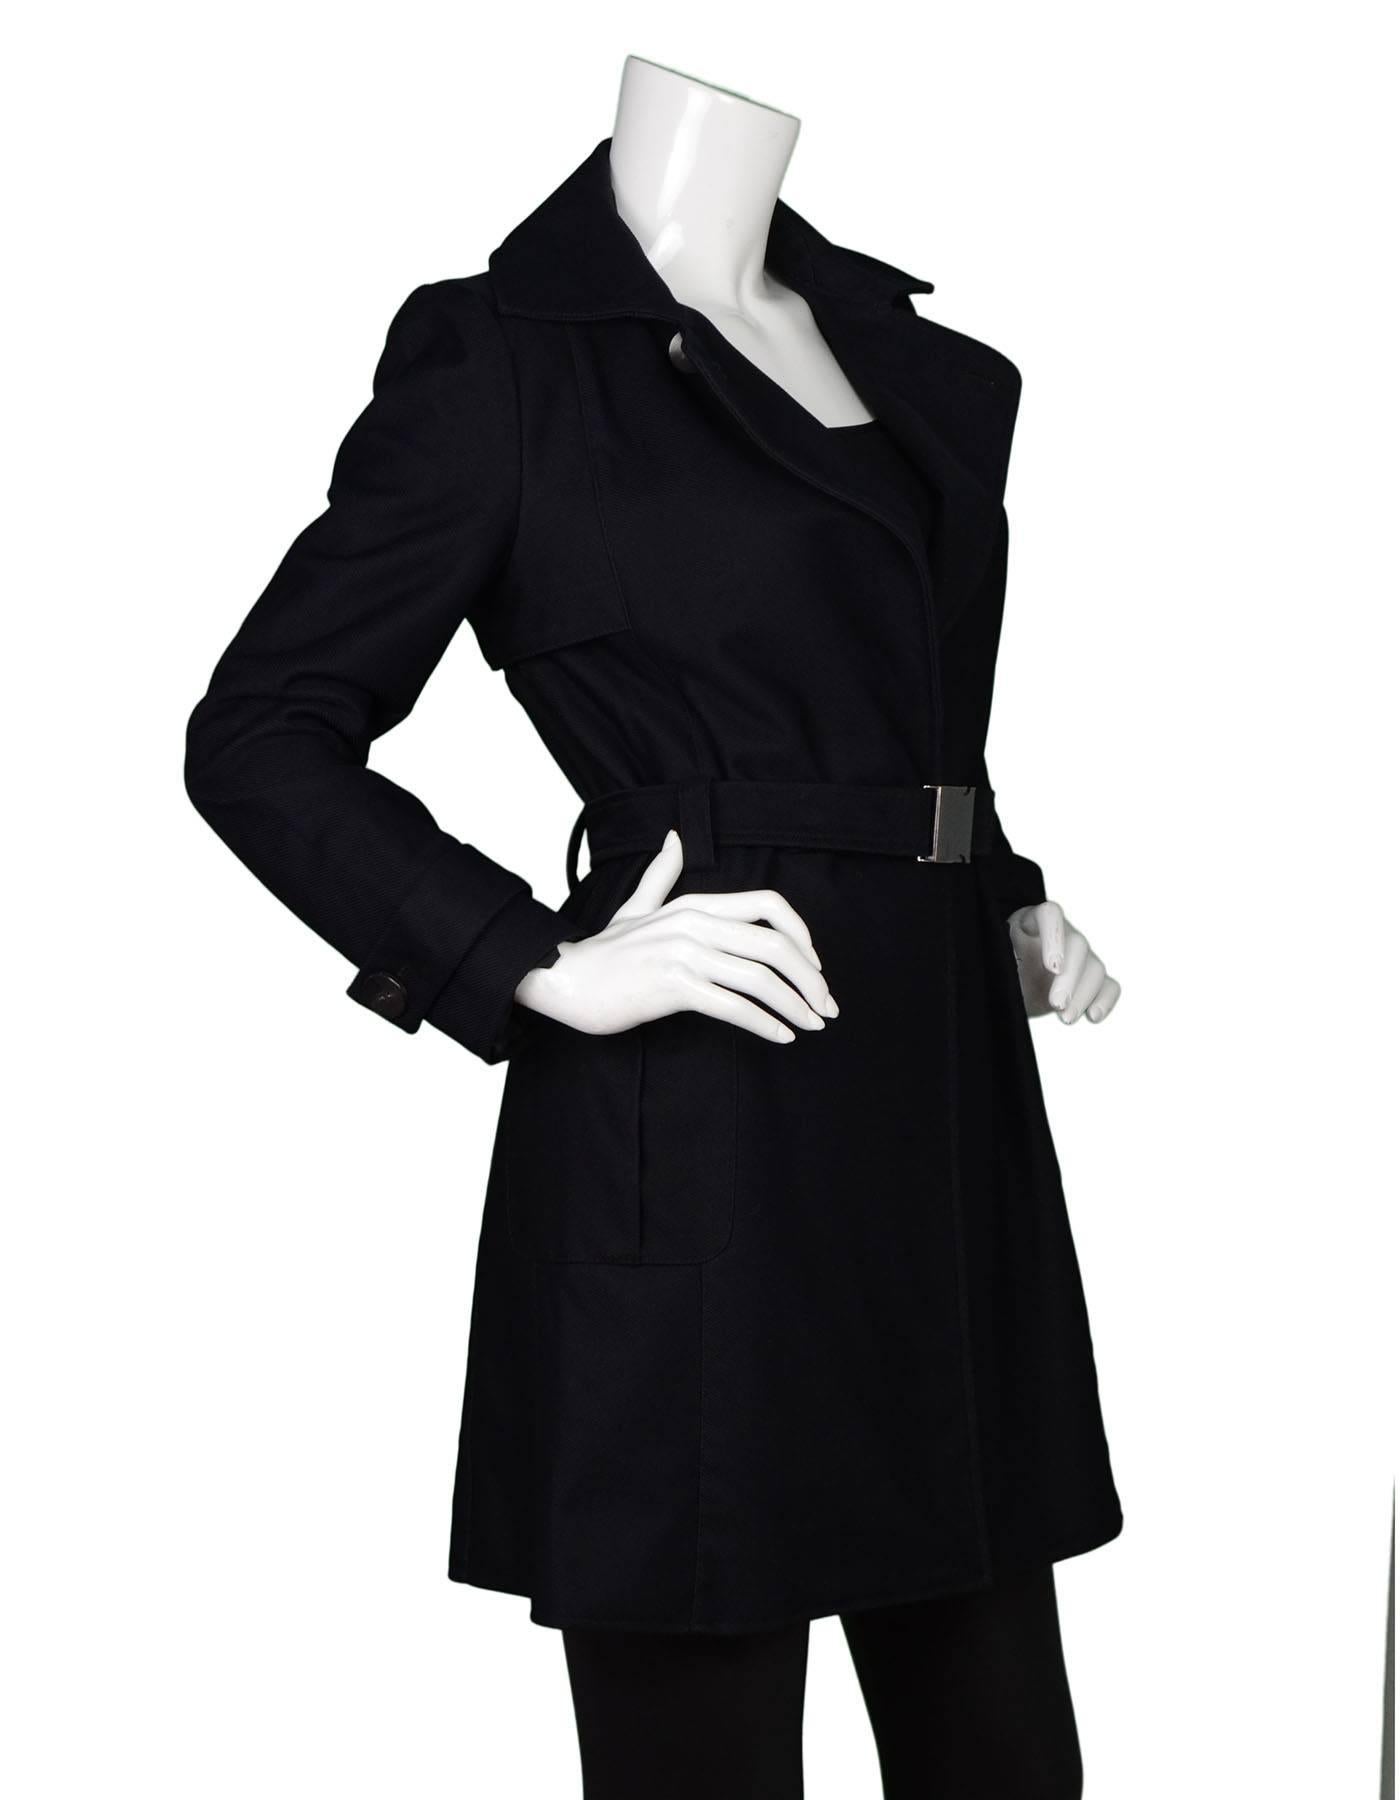 Loewe Navy Trench Coat Sz 38
Features belt at waist

Made In: Spain
Color: Navy
Composition: Not listed, feels like wool blend
Lining: Black textile
Closure/Opening: Front hidden button closure and belt at waist
Exterior Pockets: Two hip zip